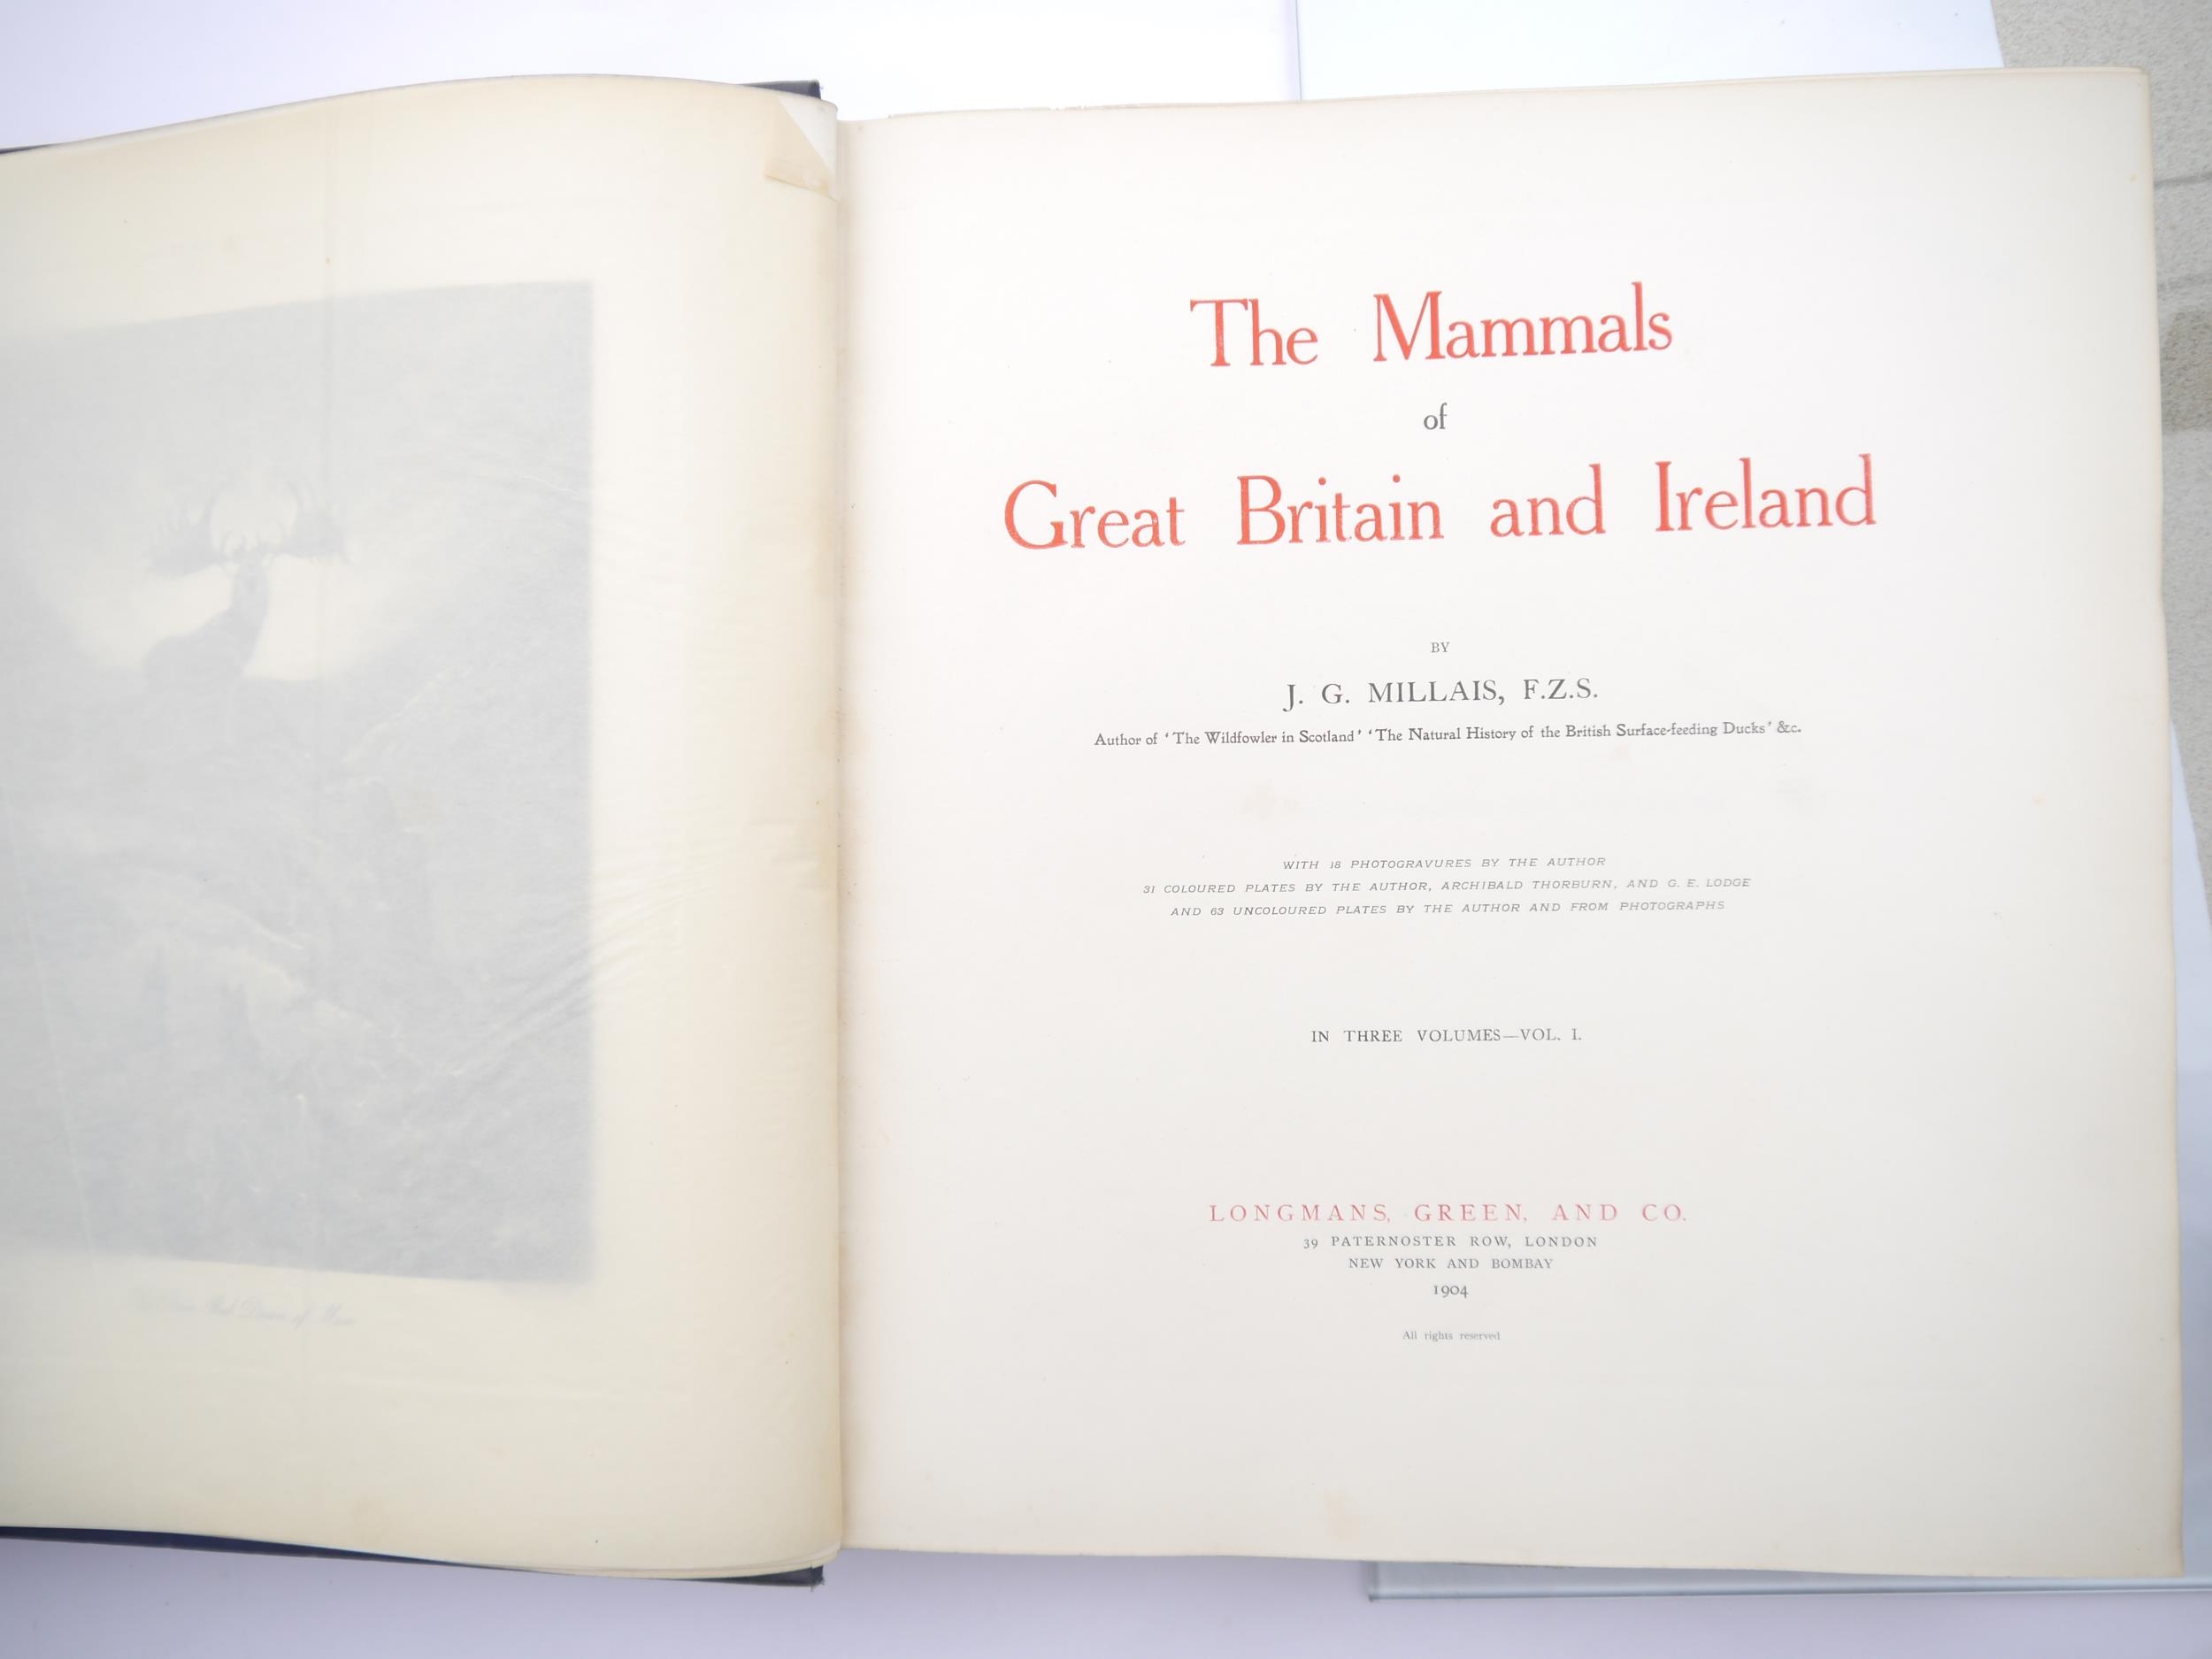 John Guille Millais: 'The Mammals of Great Britain and Ireland', London, Longmans, Green and Co., - Image 4 of 6